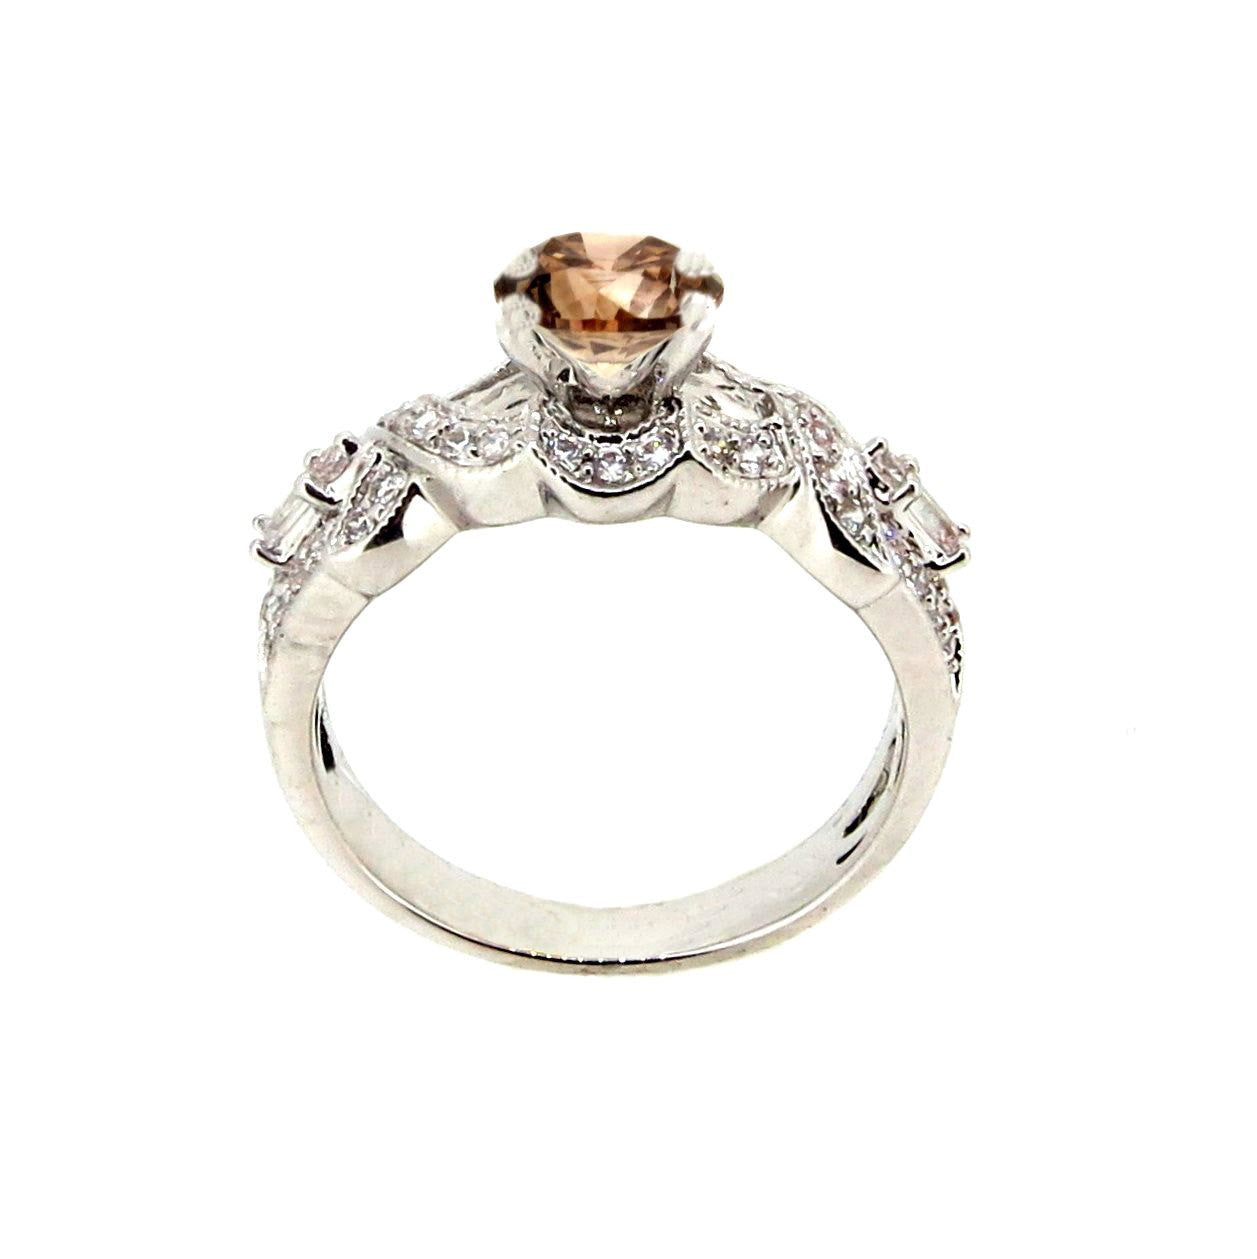 Unique Infinity Design 1 Carat Fancy Color Brown Diamond with White Diamond Accent Engagement Ring, Anniversary Ring - BD73039